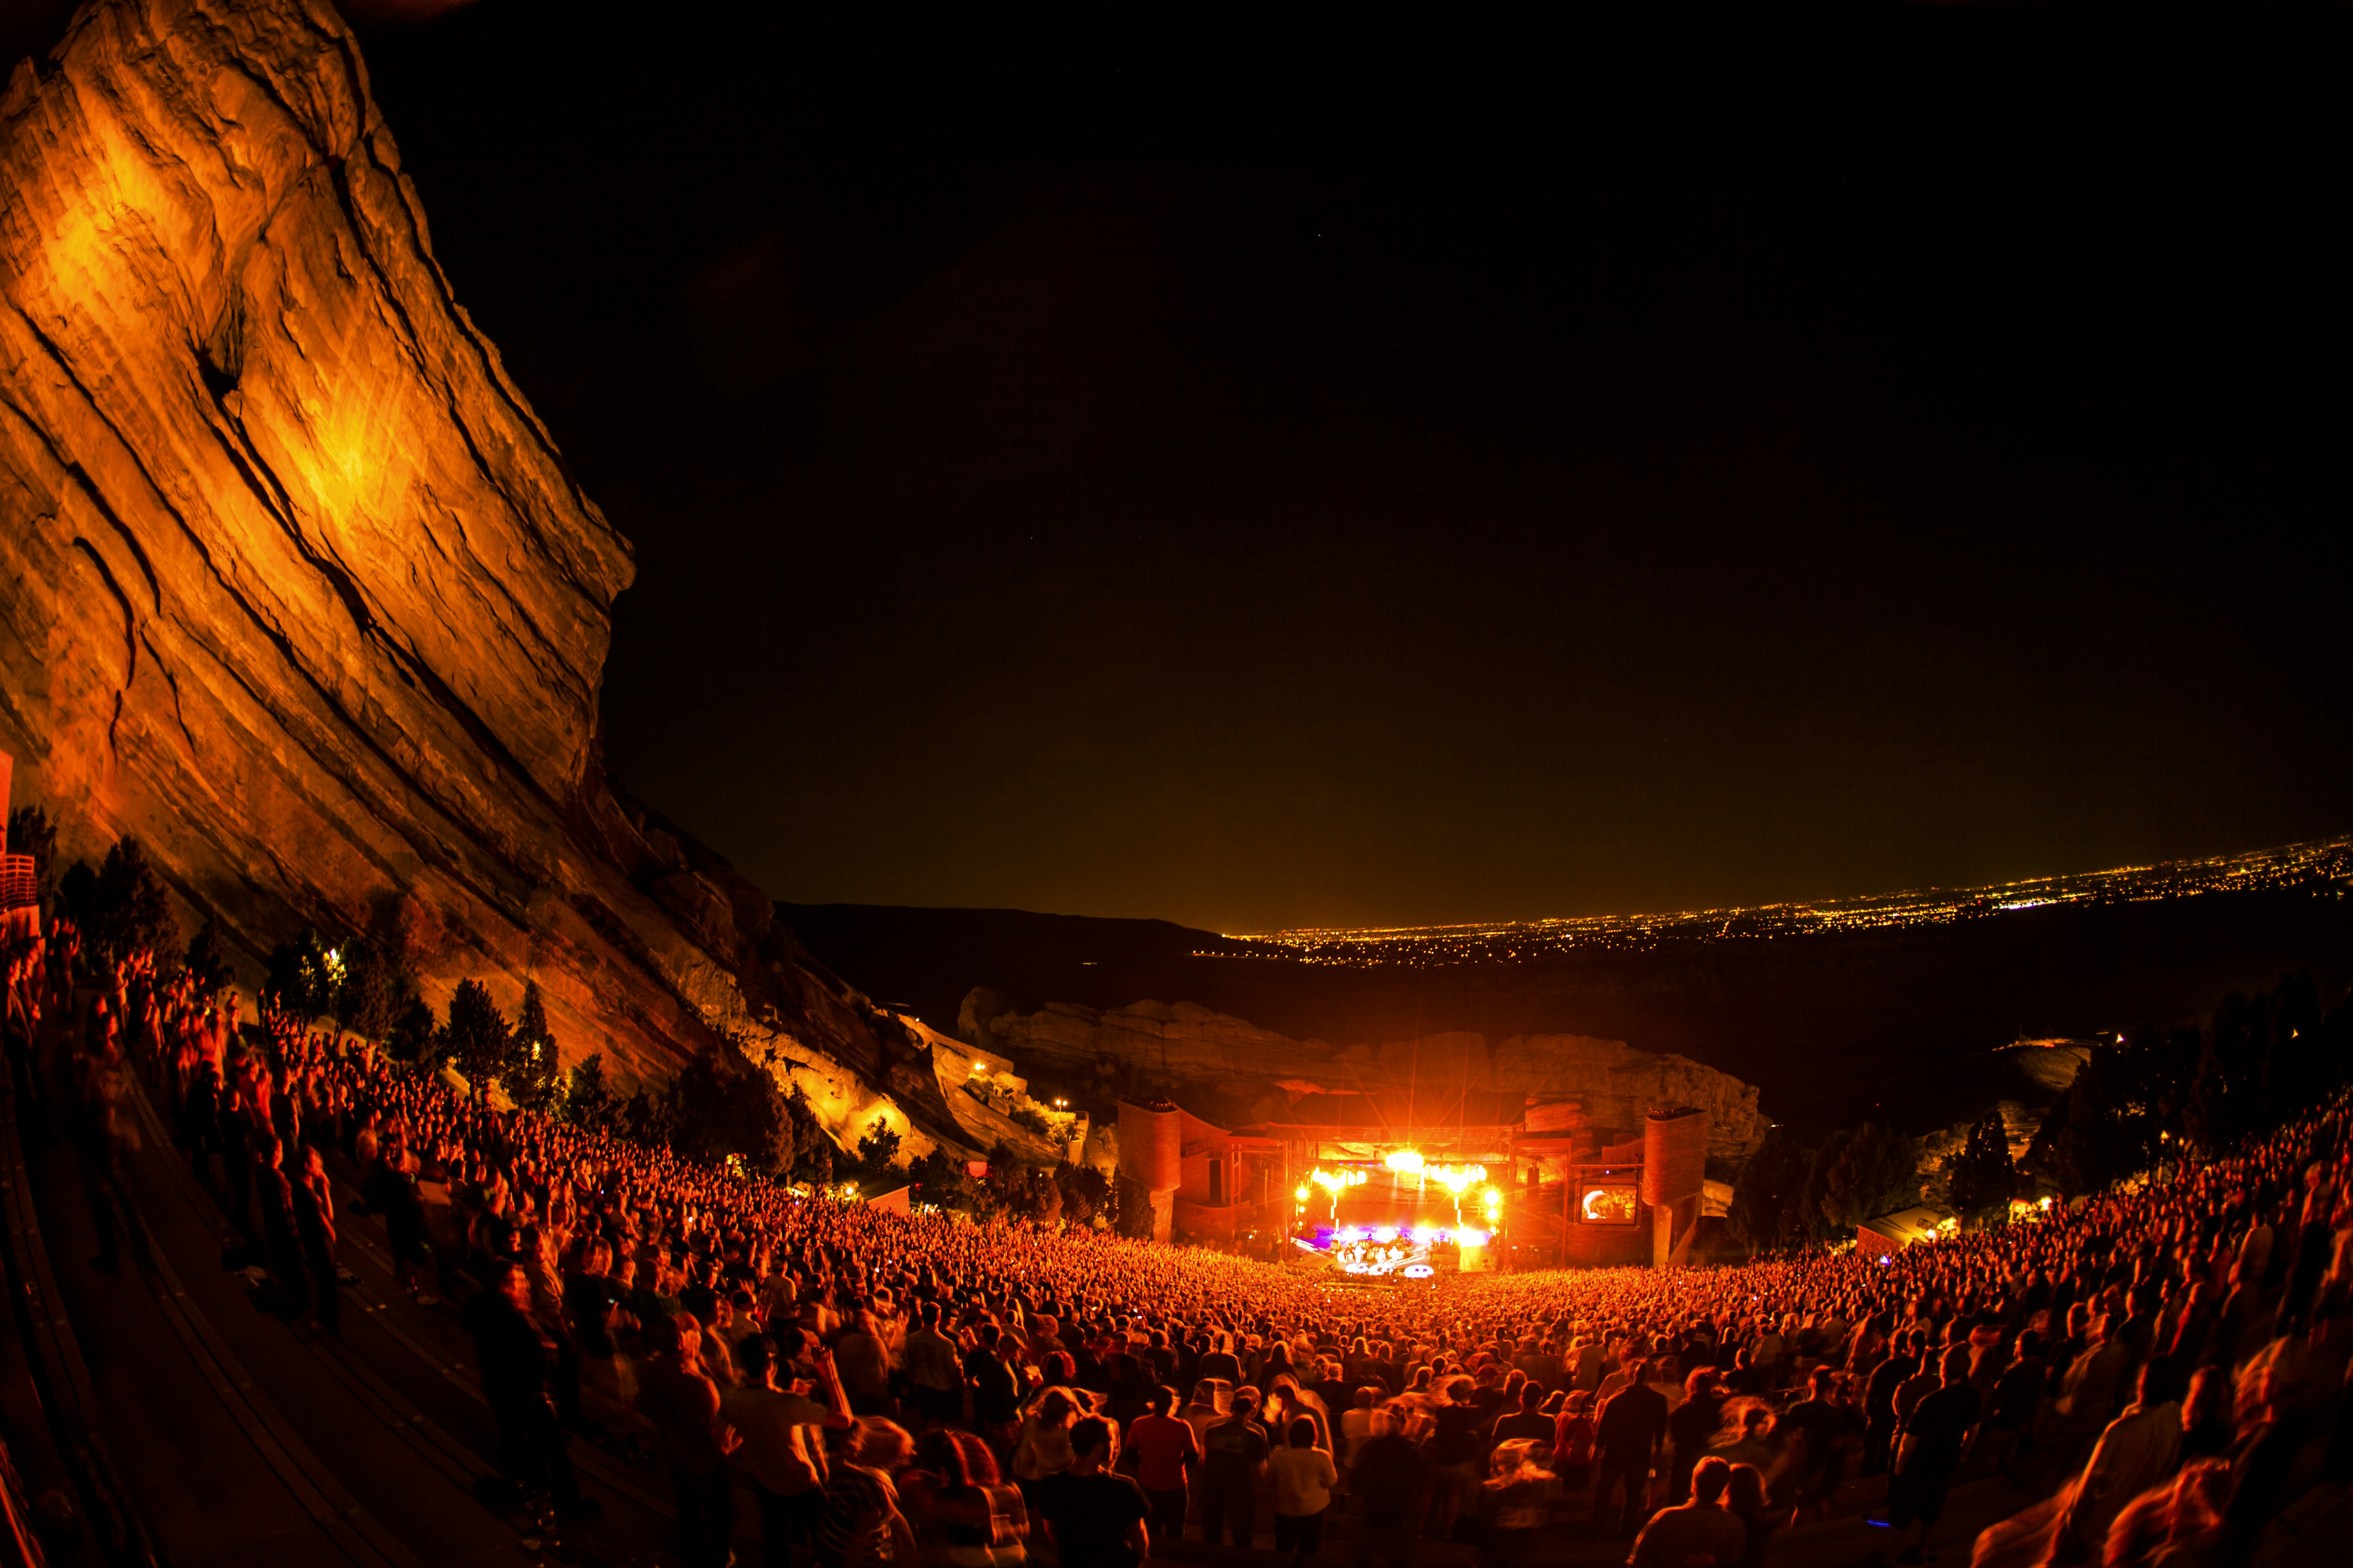 Crowd at Red Rocks Amphitheatre in Morrison, Co